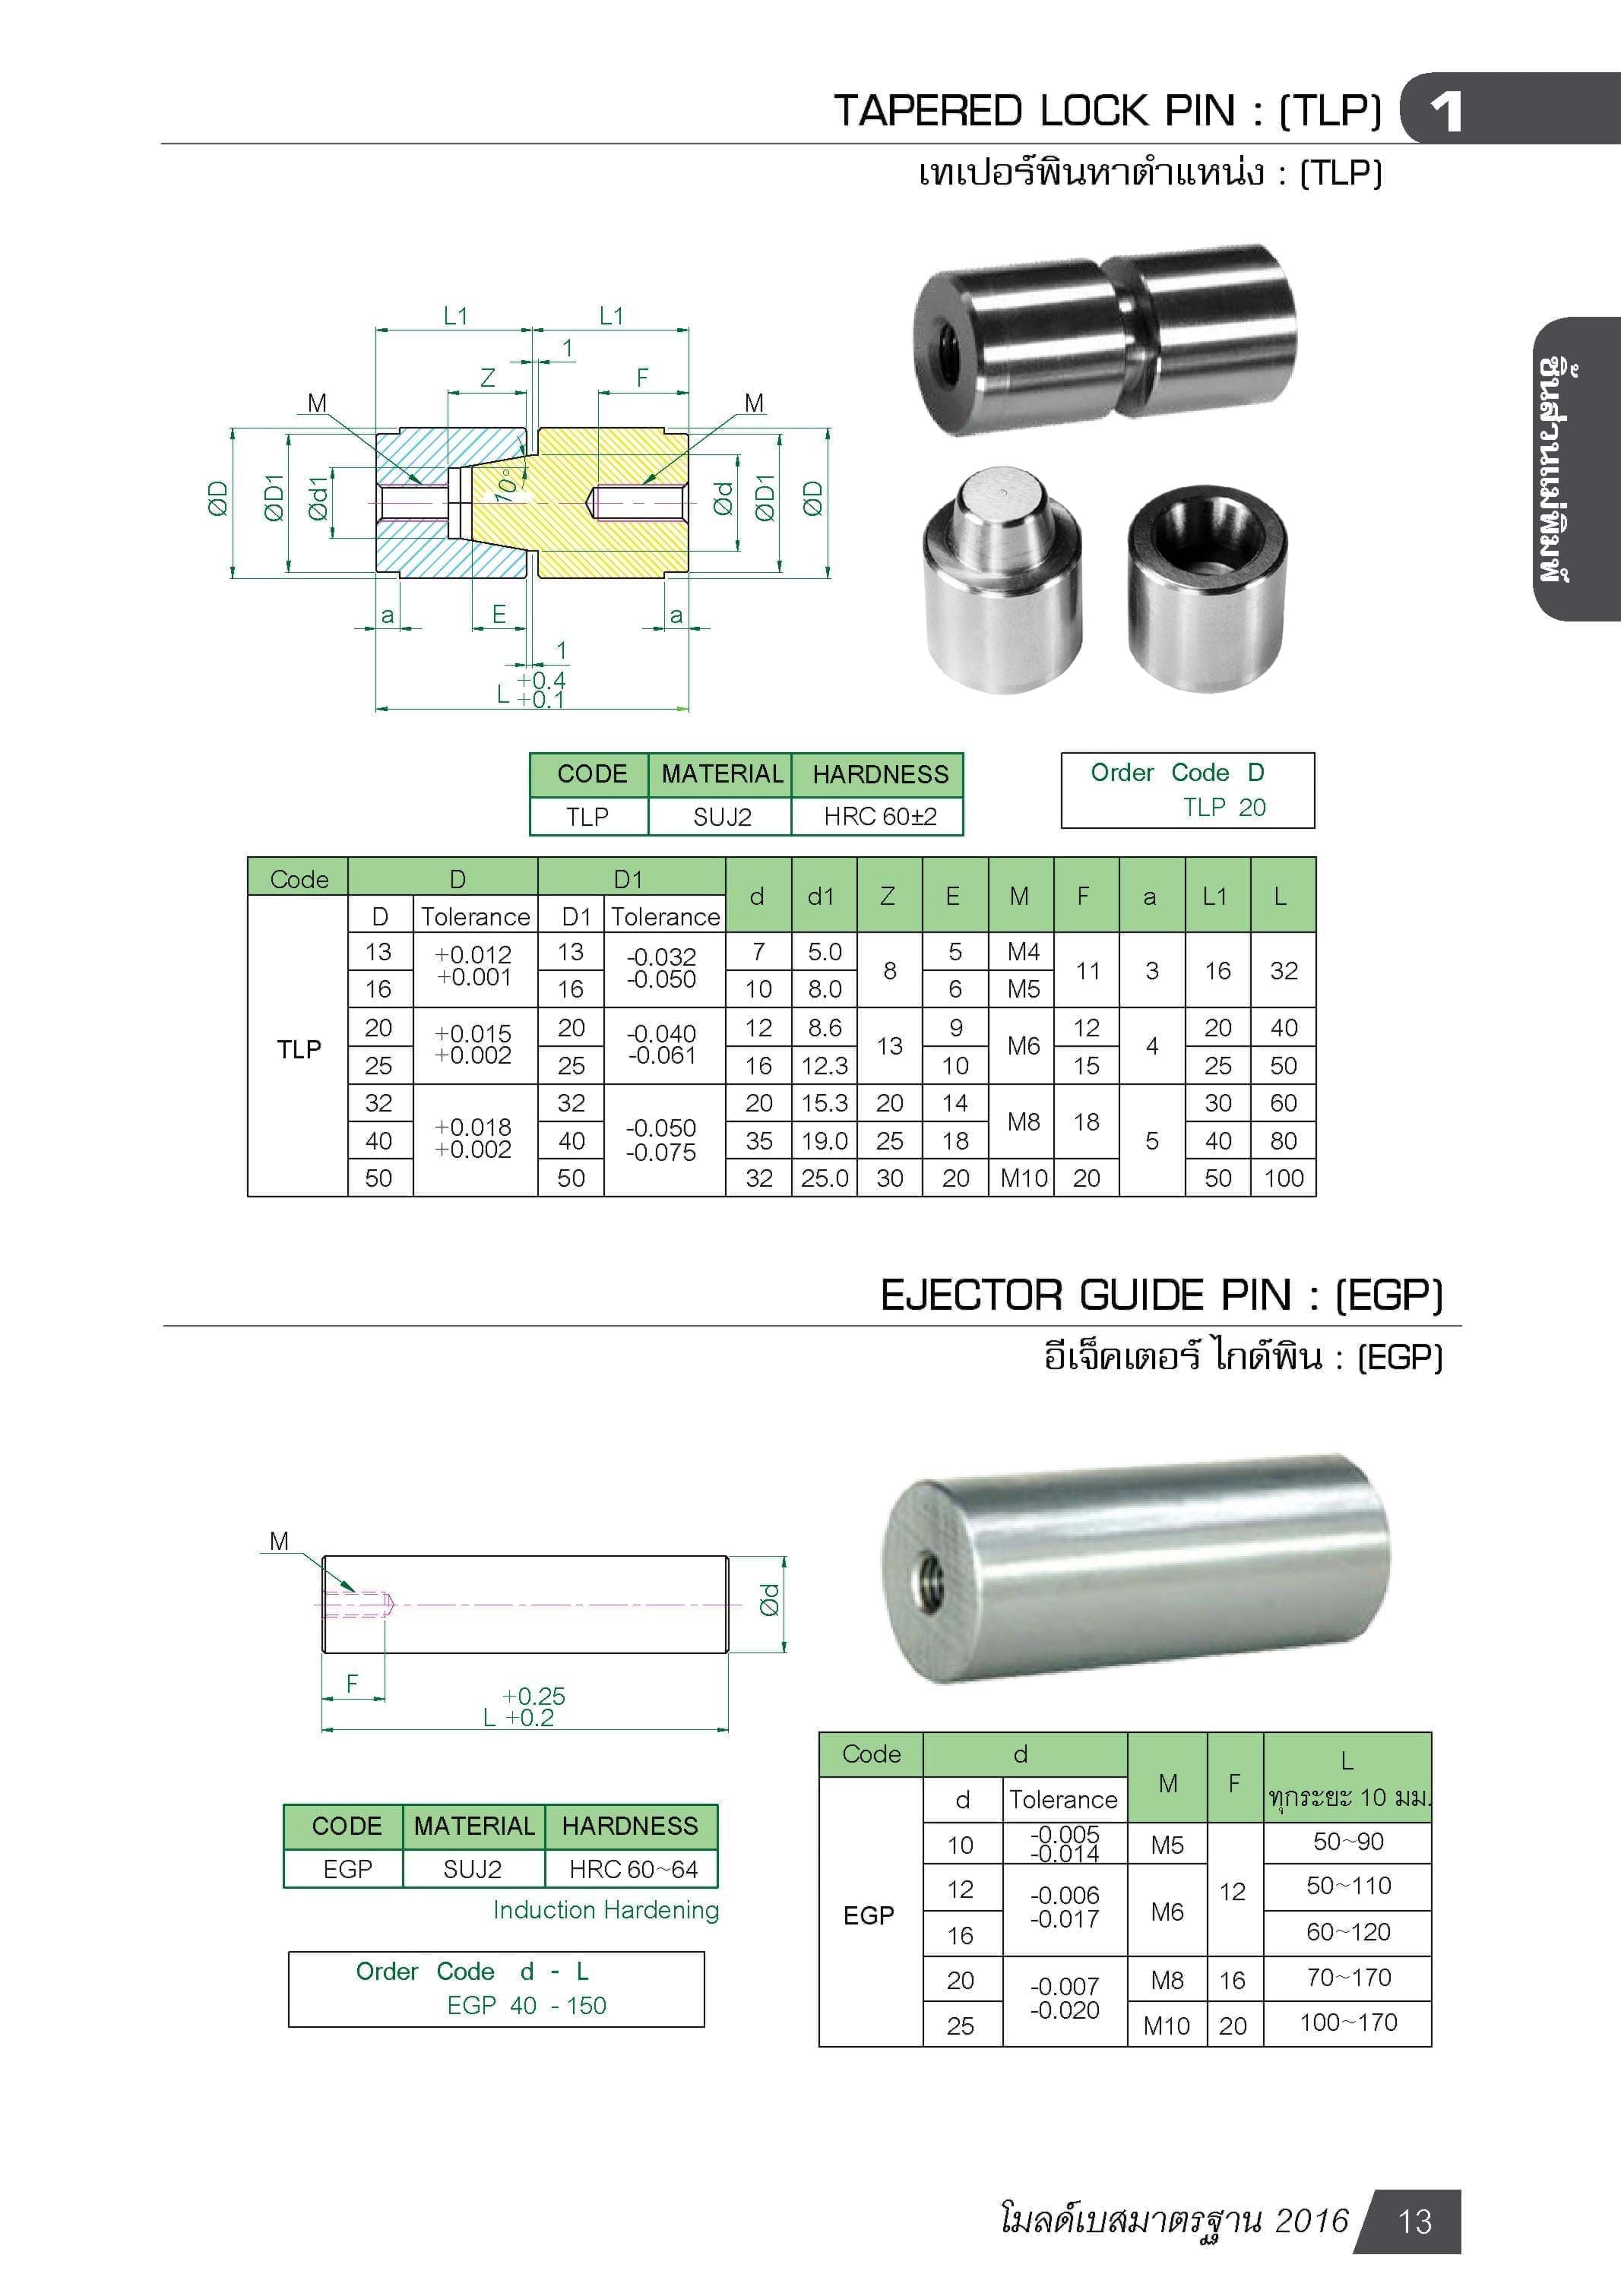 EJECTOR GUIDE PIN : (EGP)